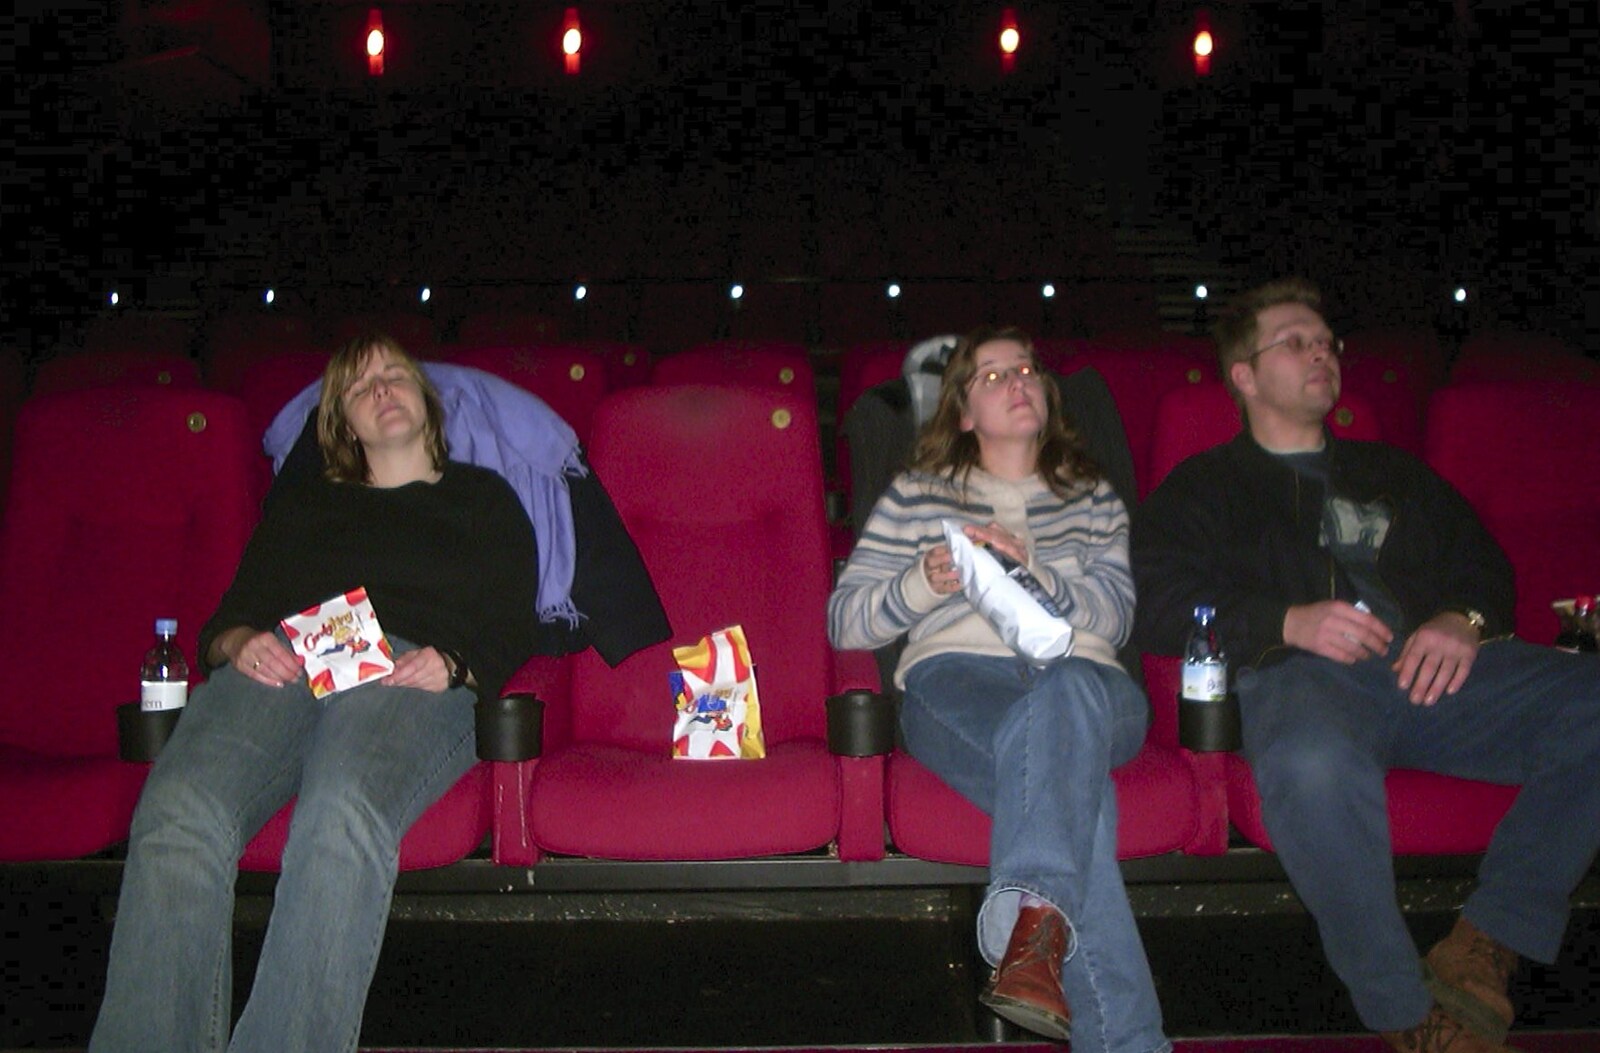 Sarah, Suey and Marc in the cinema from Sarah's Games Night at Anne's, Thornham, Suffolk - 27th December 2003